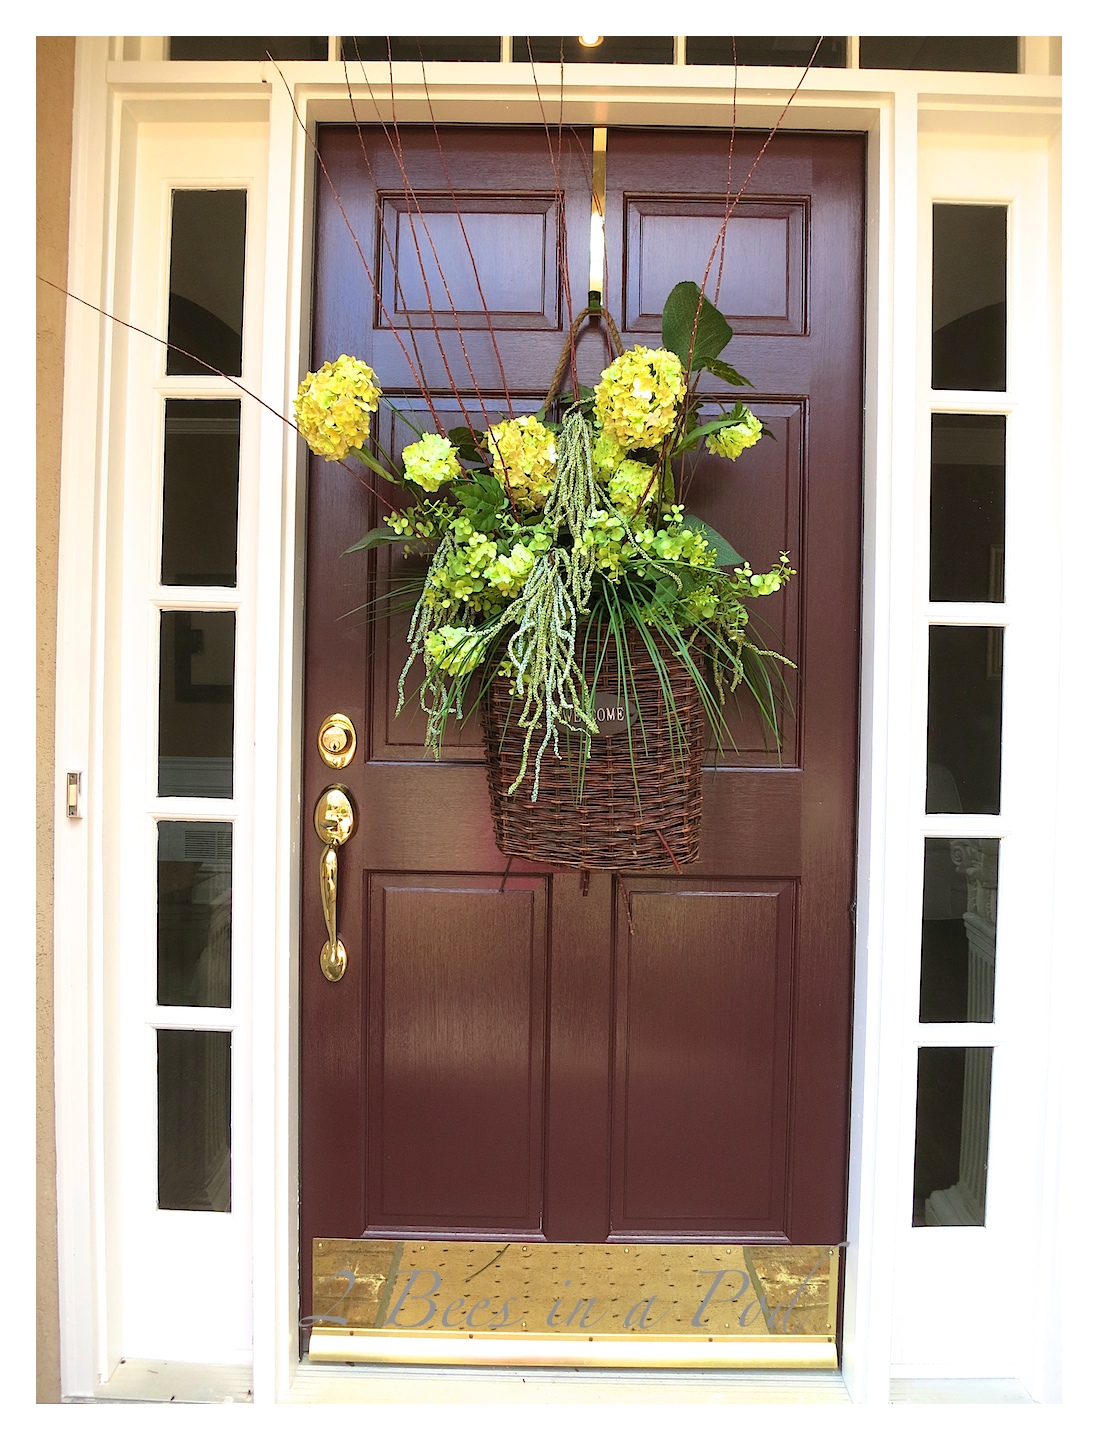 A welcome basket wreath for the front door to mark the beginning of Spring! Florals mixed with natural elements makes for a beautiful display on the front door.